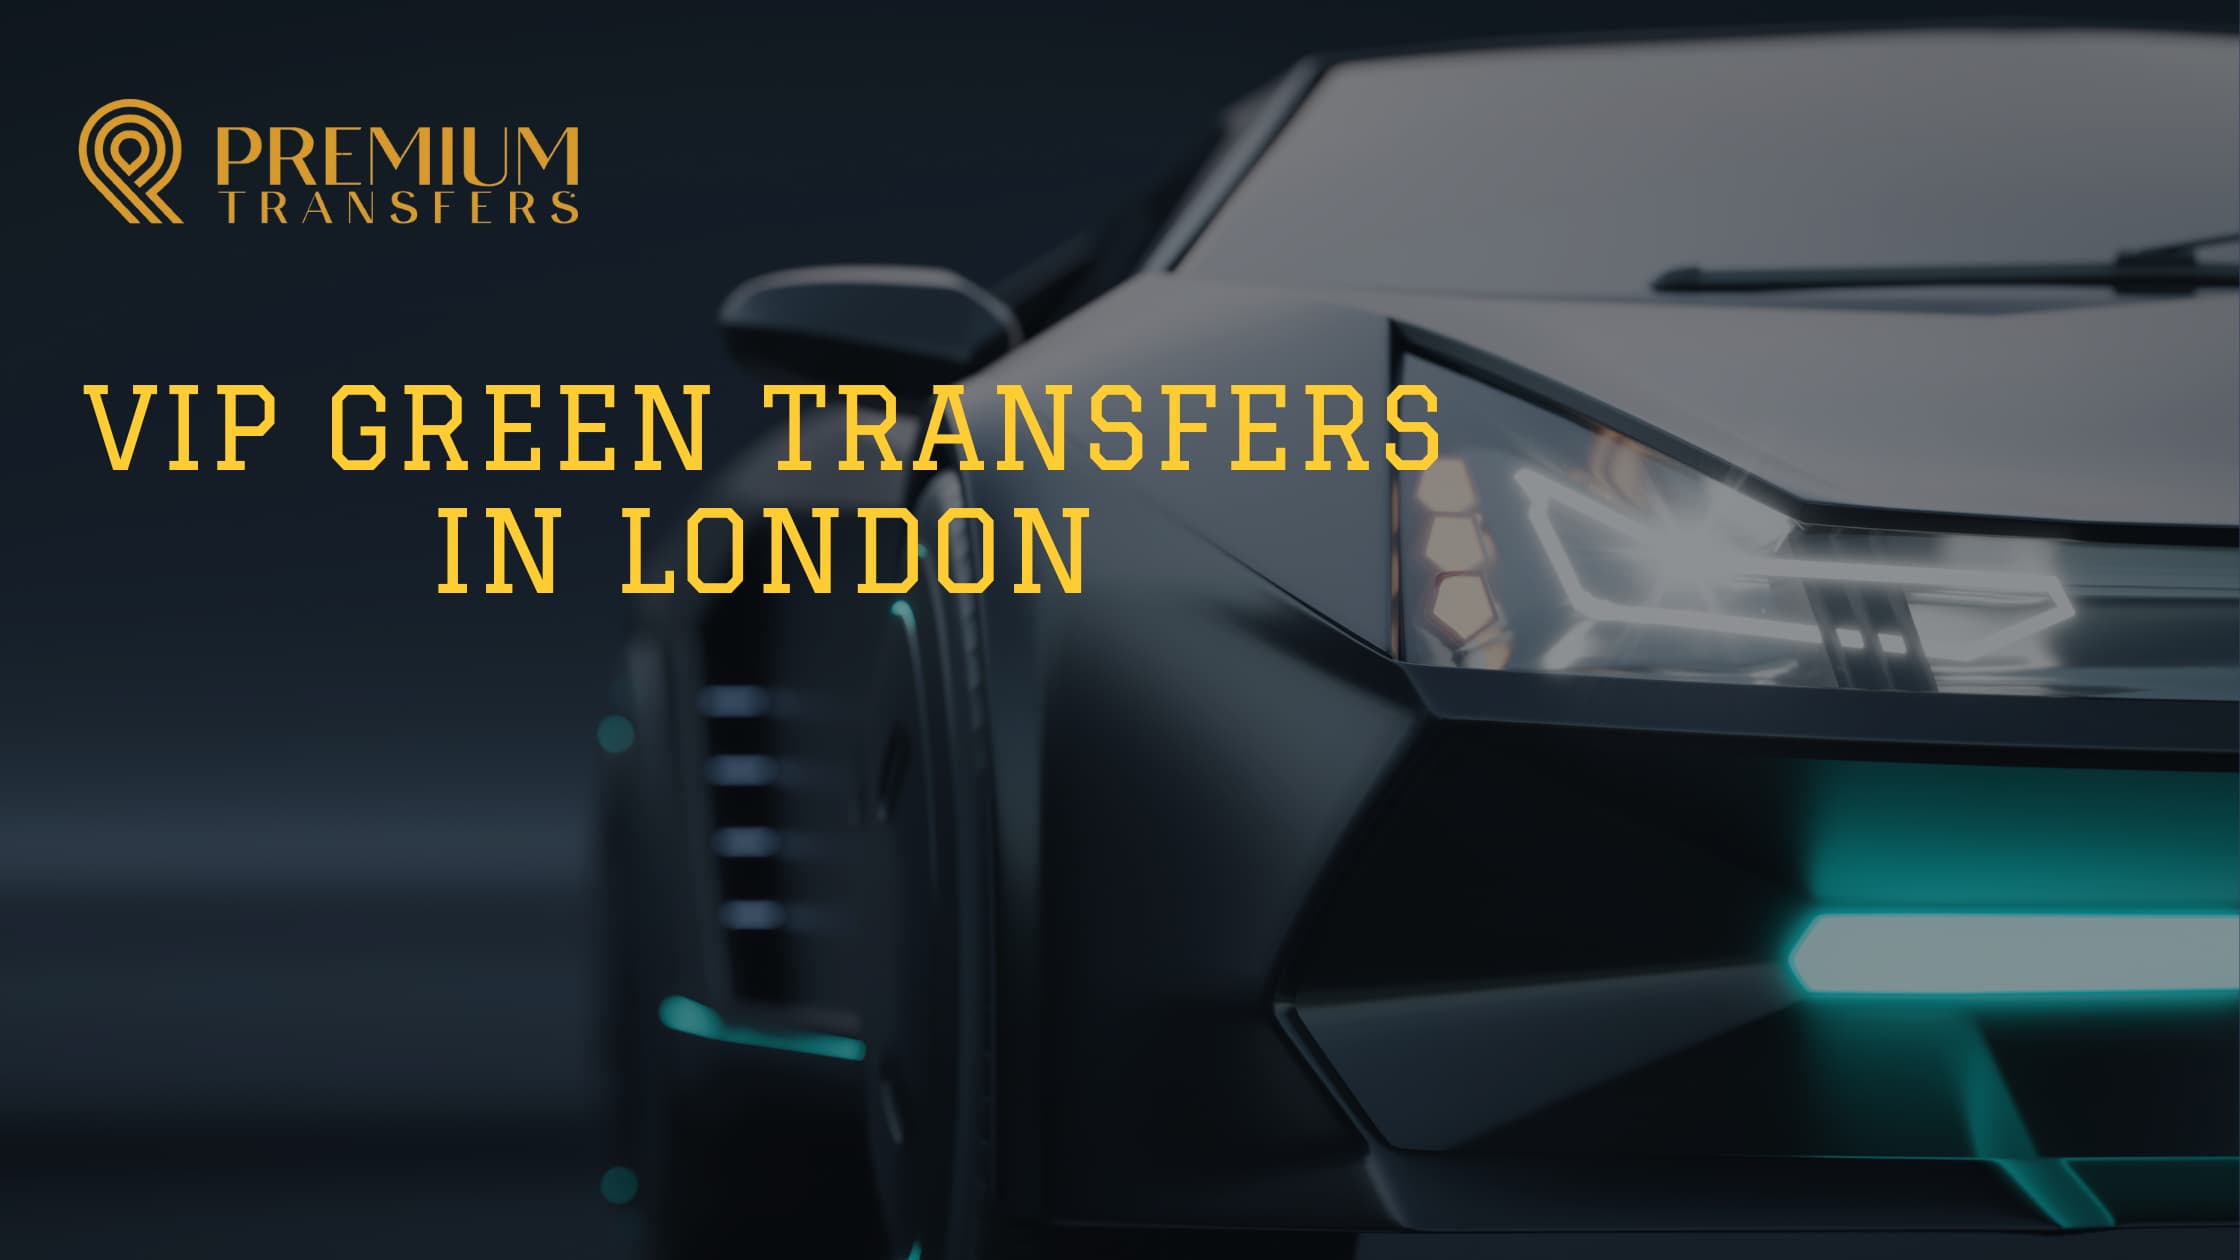 Embrace Green Transportation: The Future of VIP Transfers in London